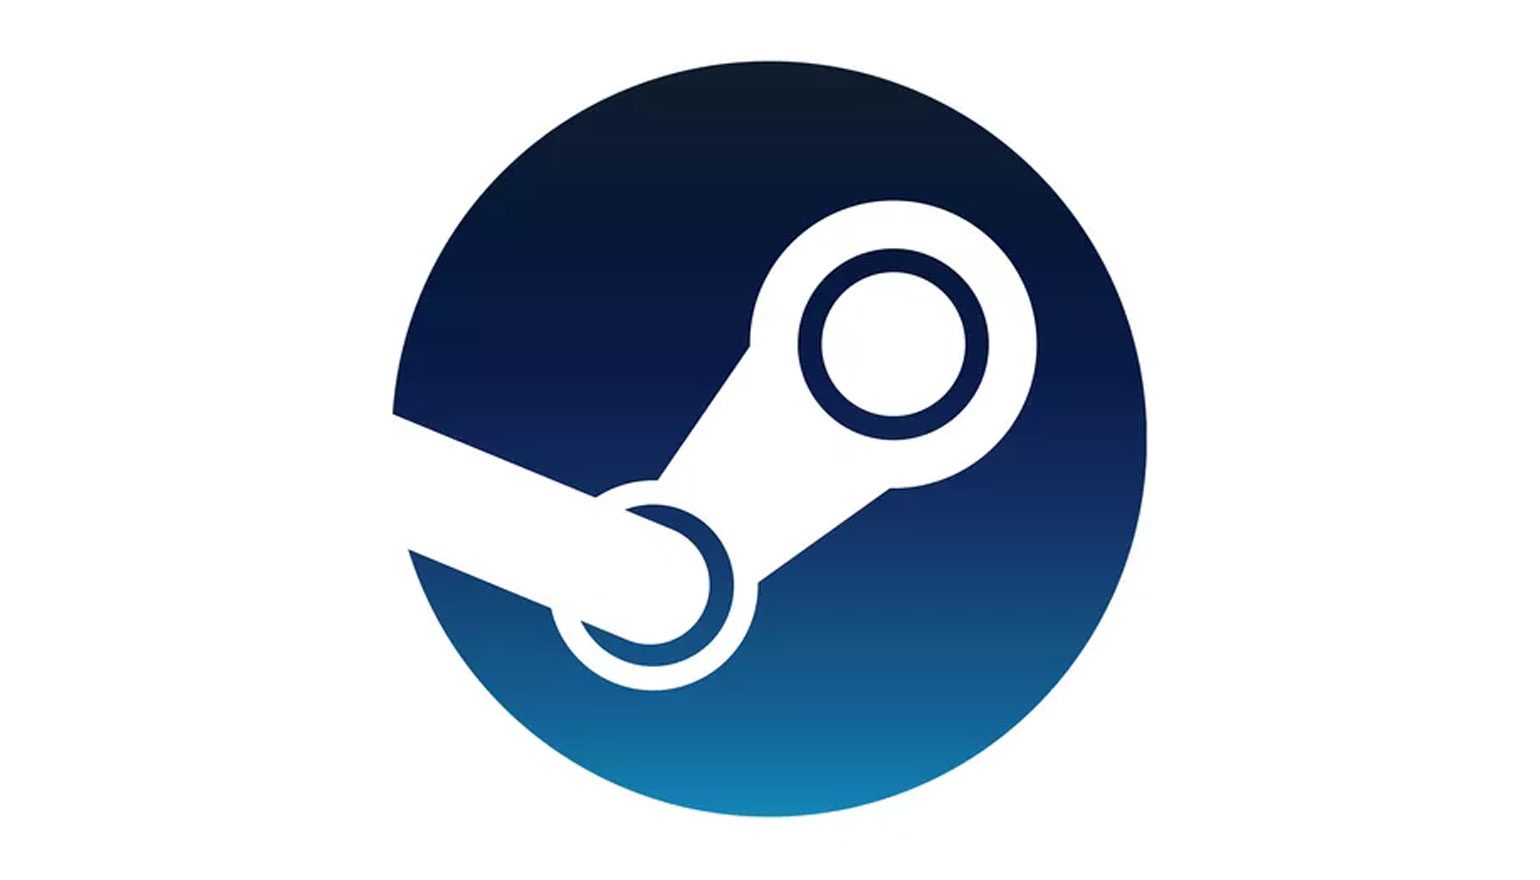 steam link android apk